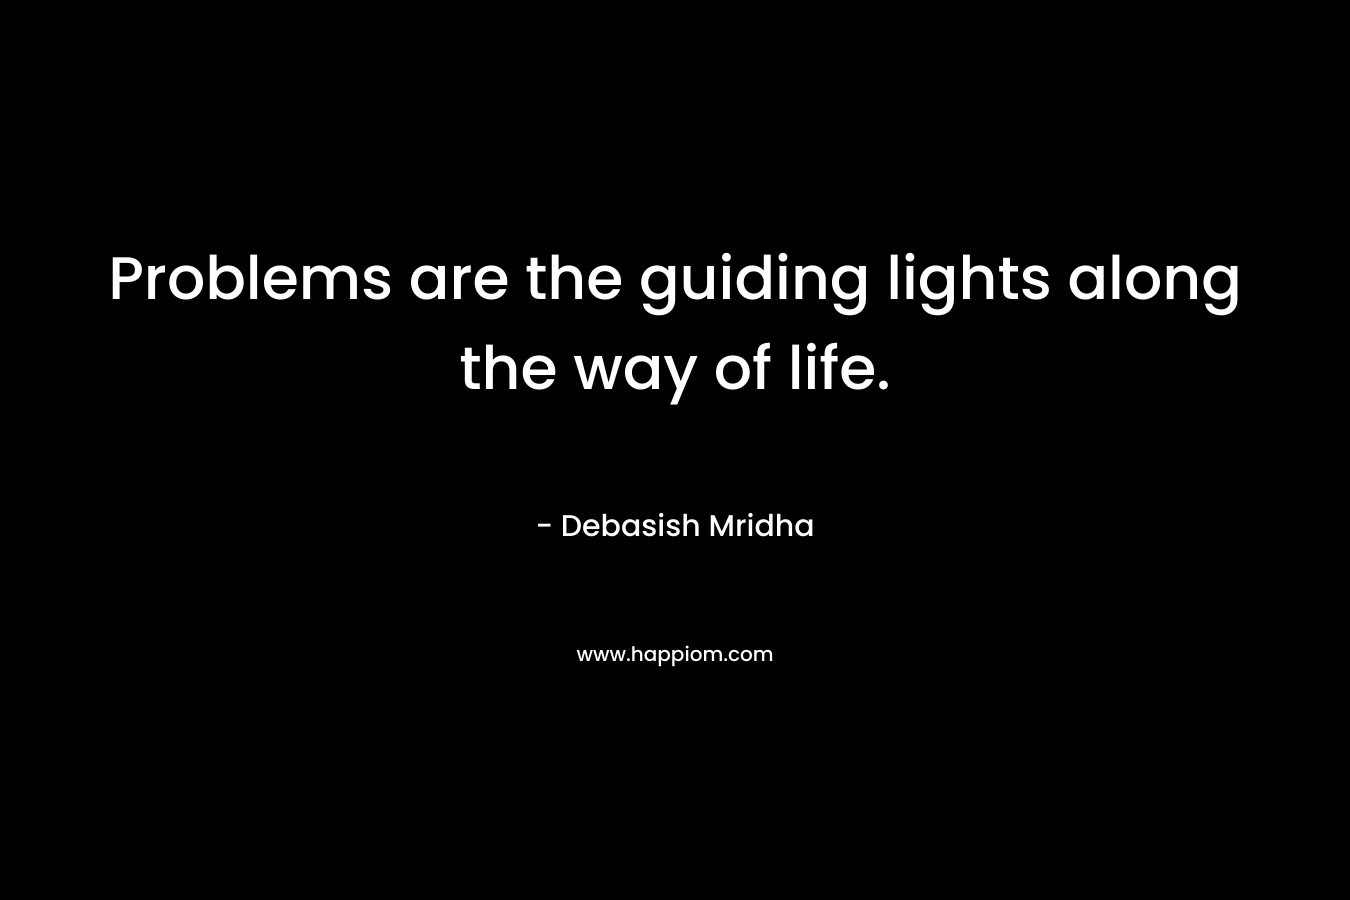 Problems are the guiding lights along the way of life.